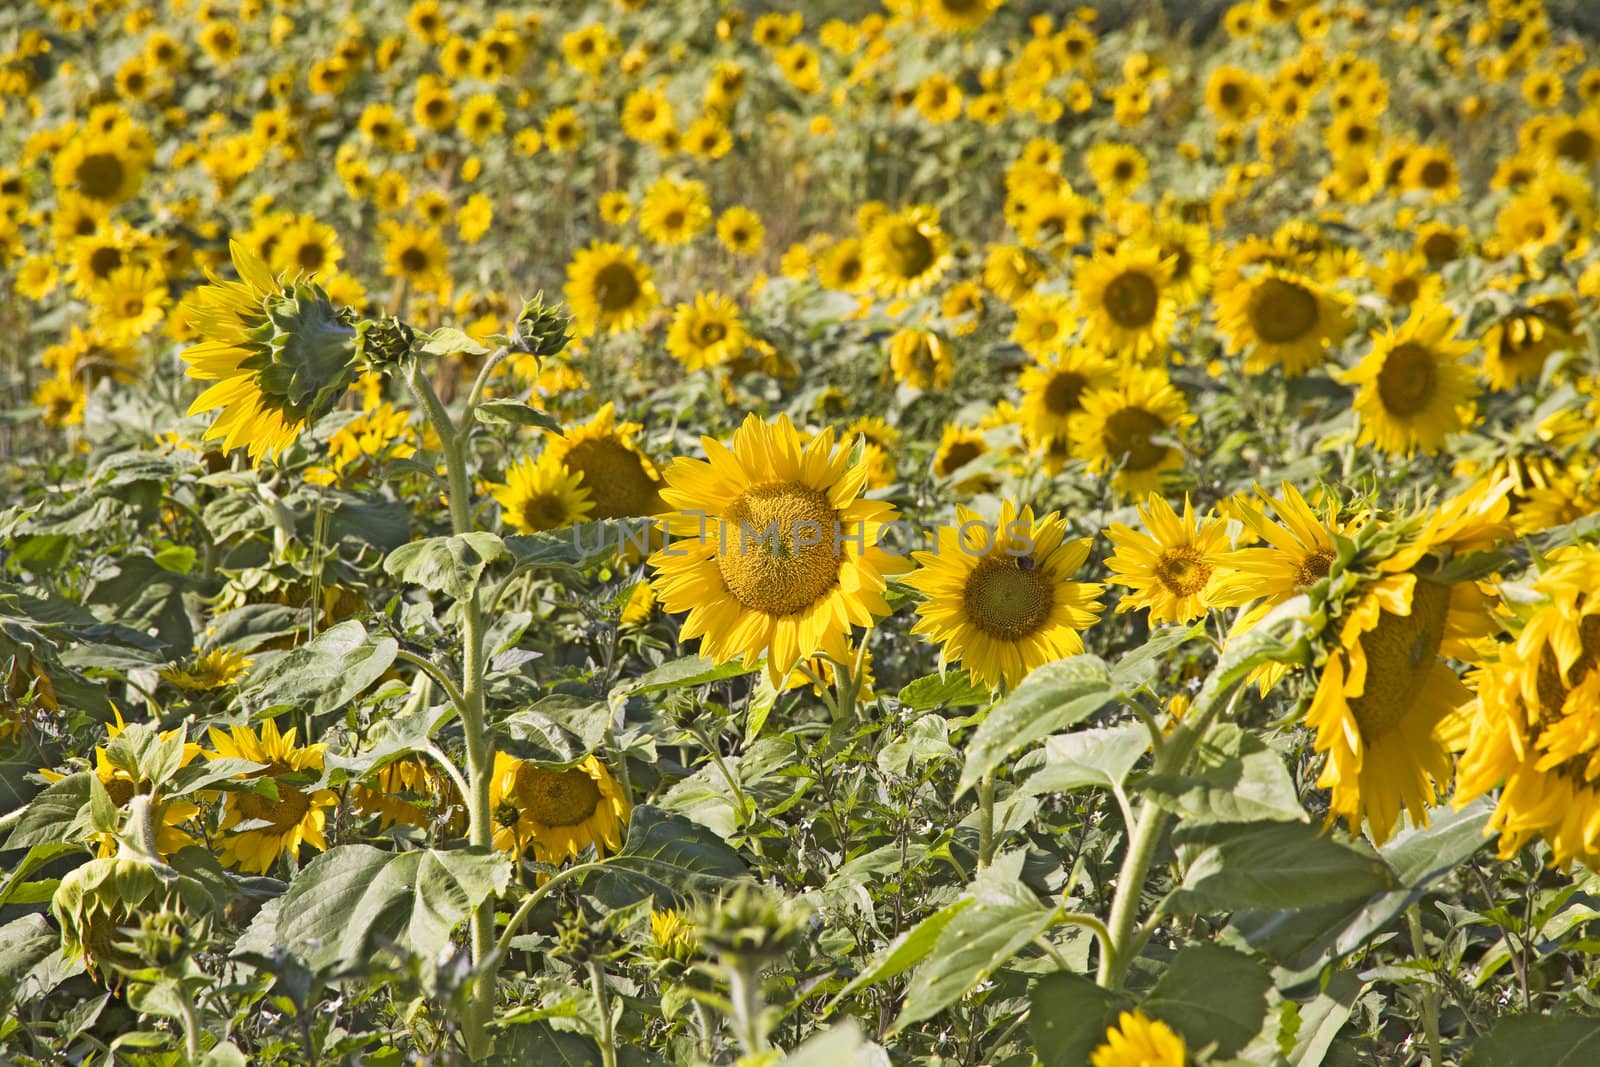 yellow sunflower field with lots of blossoms